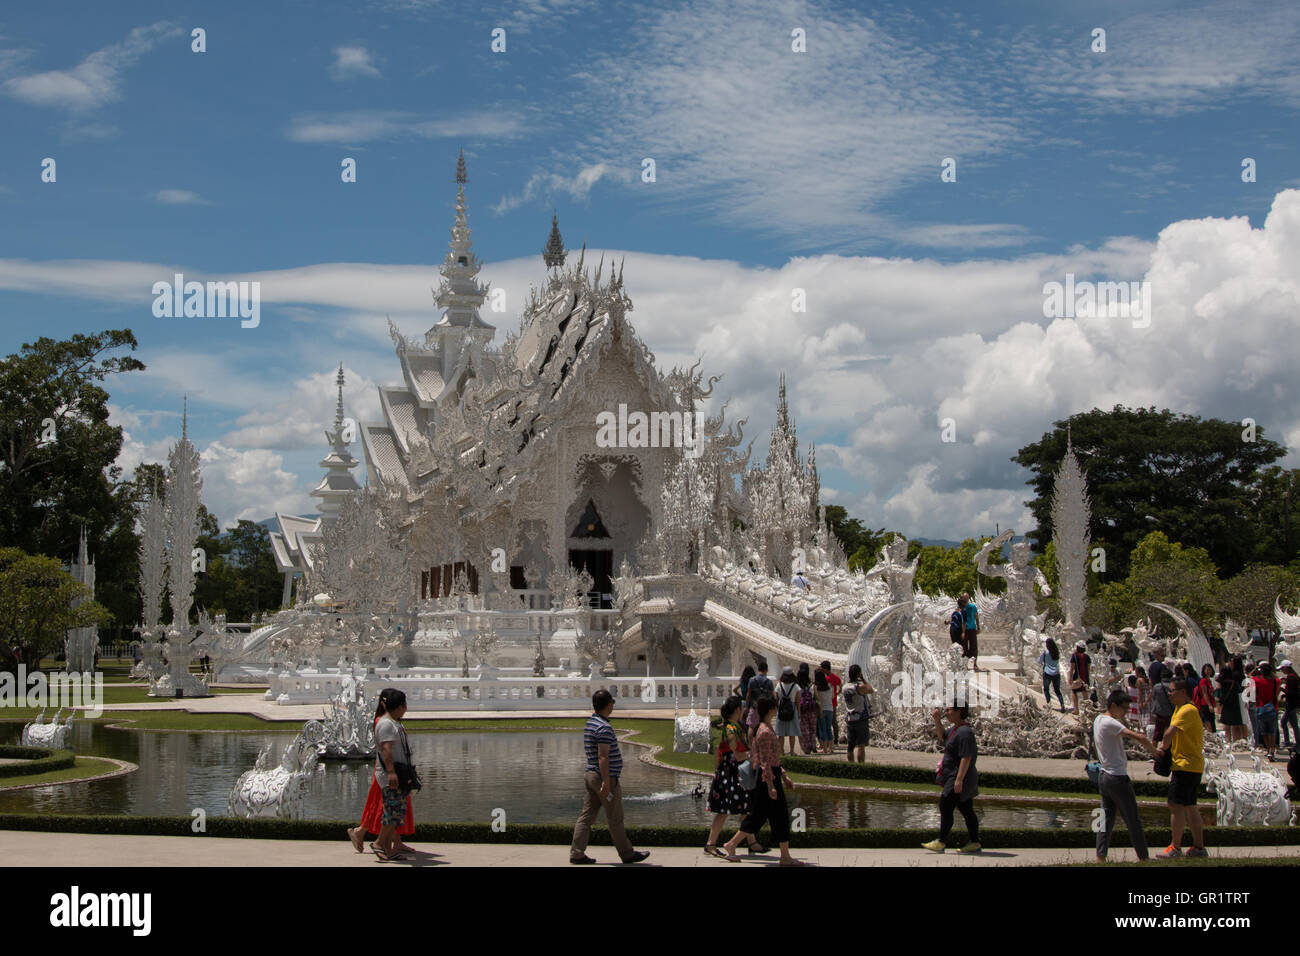 Tourists in front of White temple (Wat Rong Khun) in Chiang Rai, Thailand Stock Photo